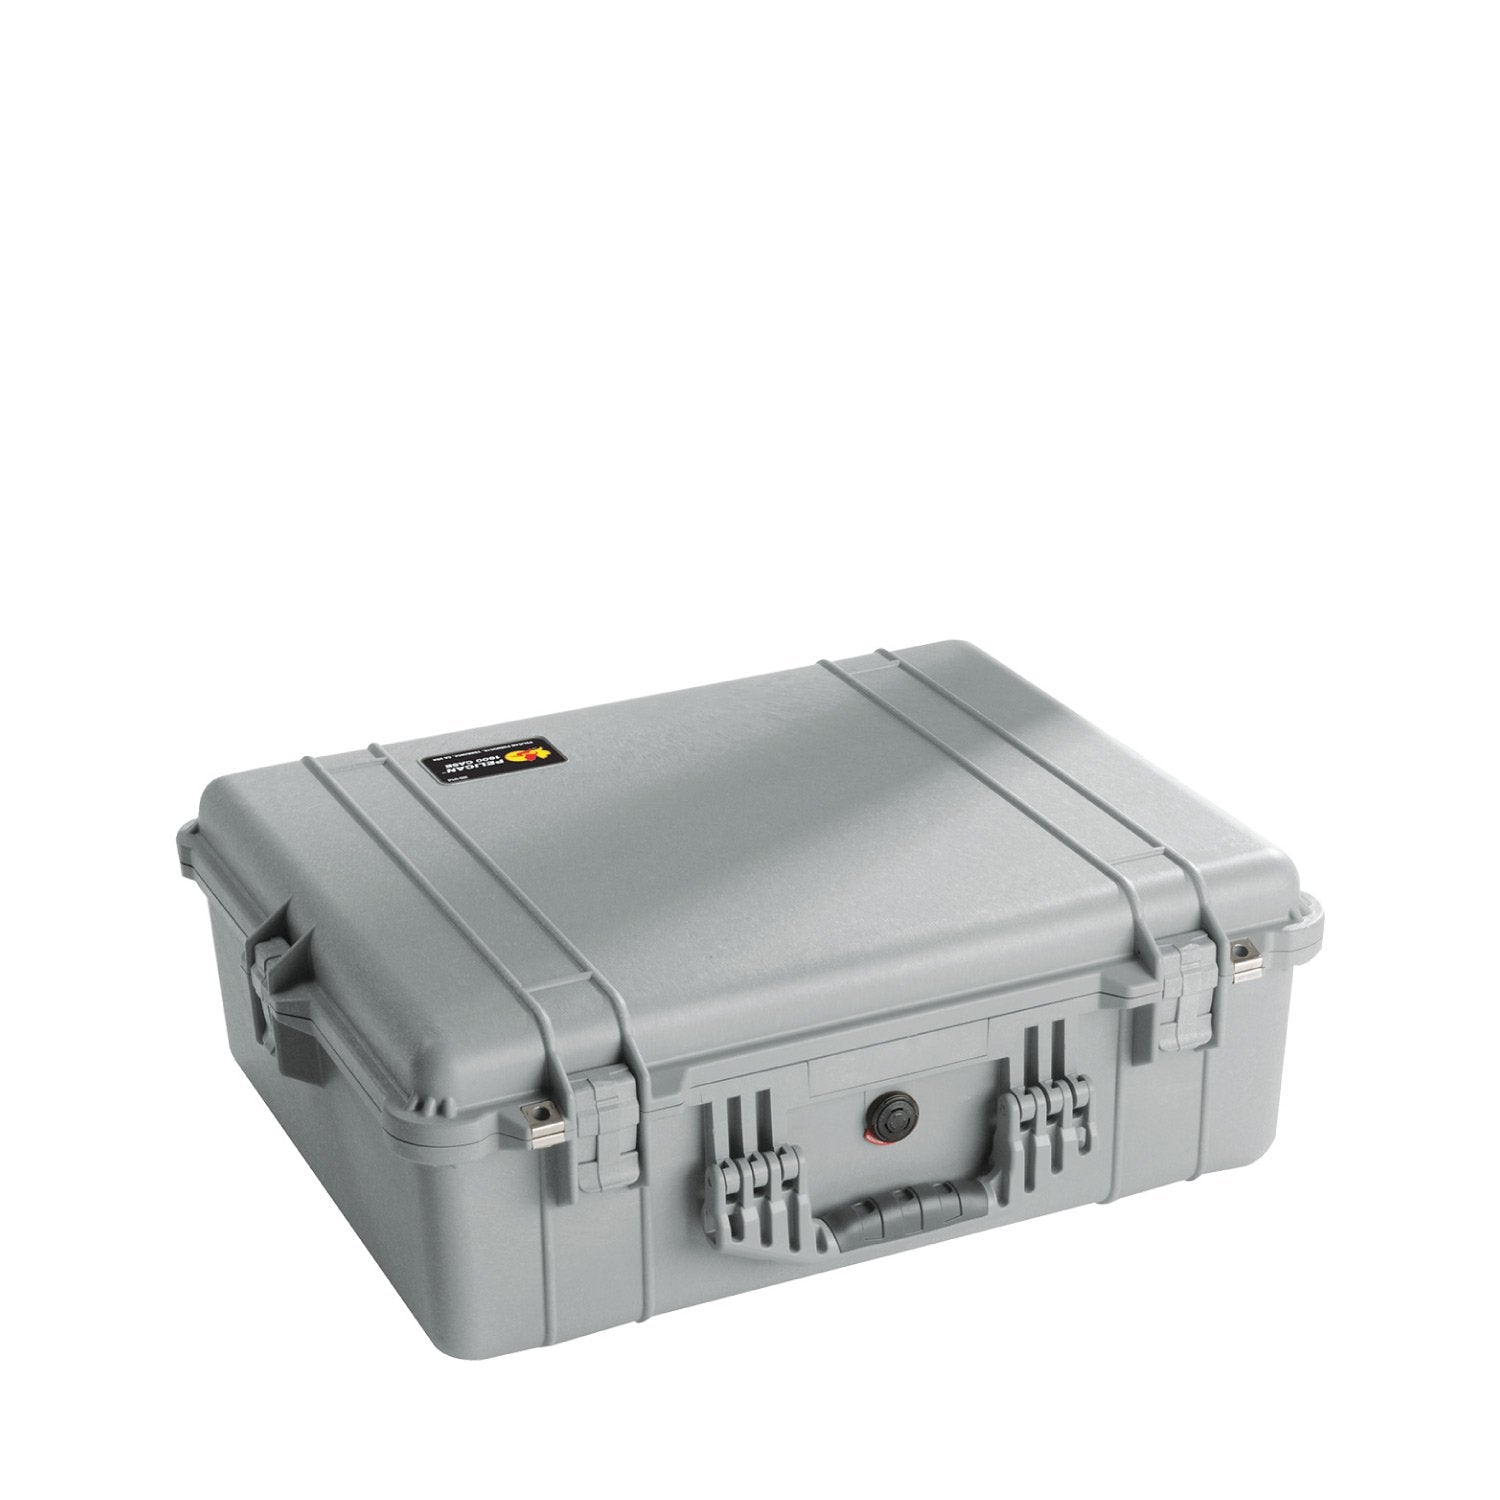 Pelican 1600 Classic Large Hard Case Silver Bags, Packs and Cases Pelican Products With Foam Tactical Gear Supplier Tactical Distributors Australia